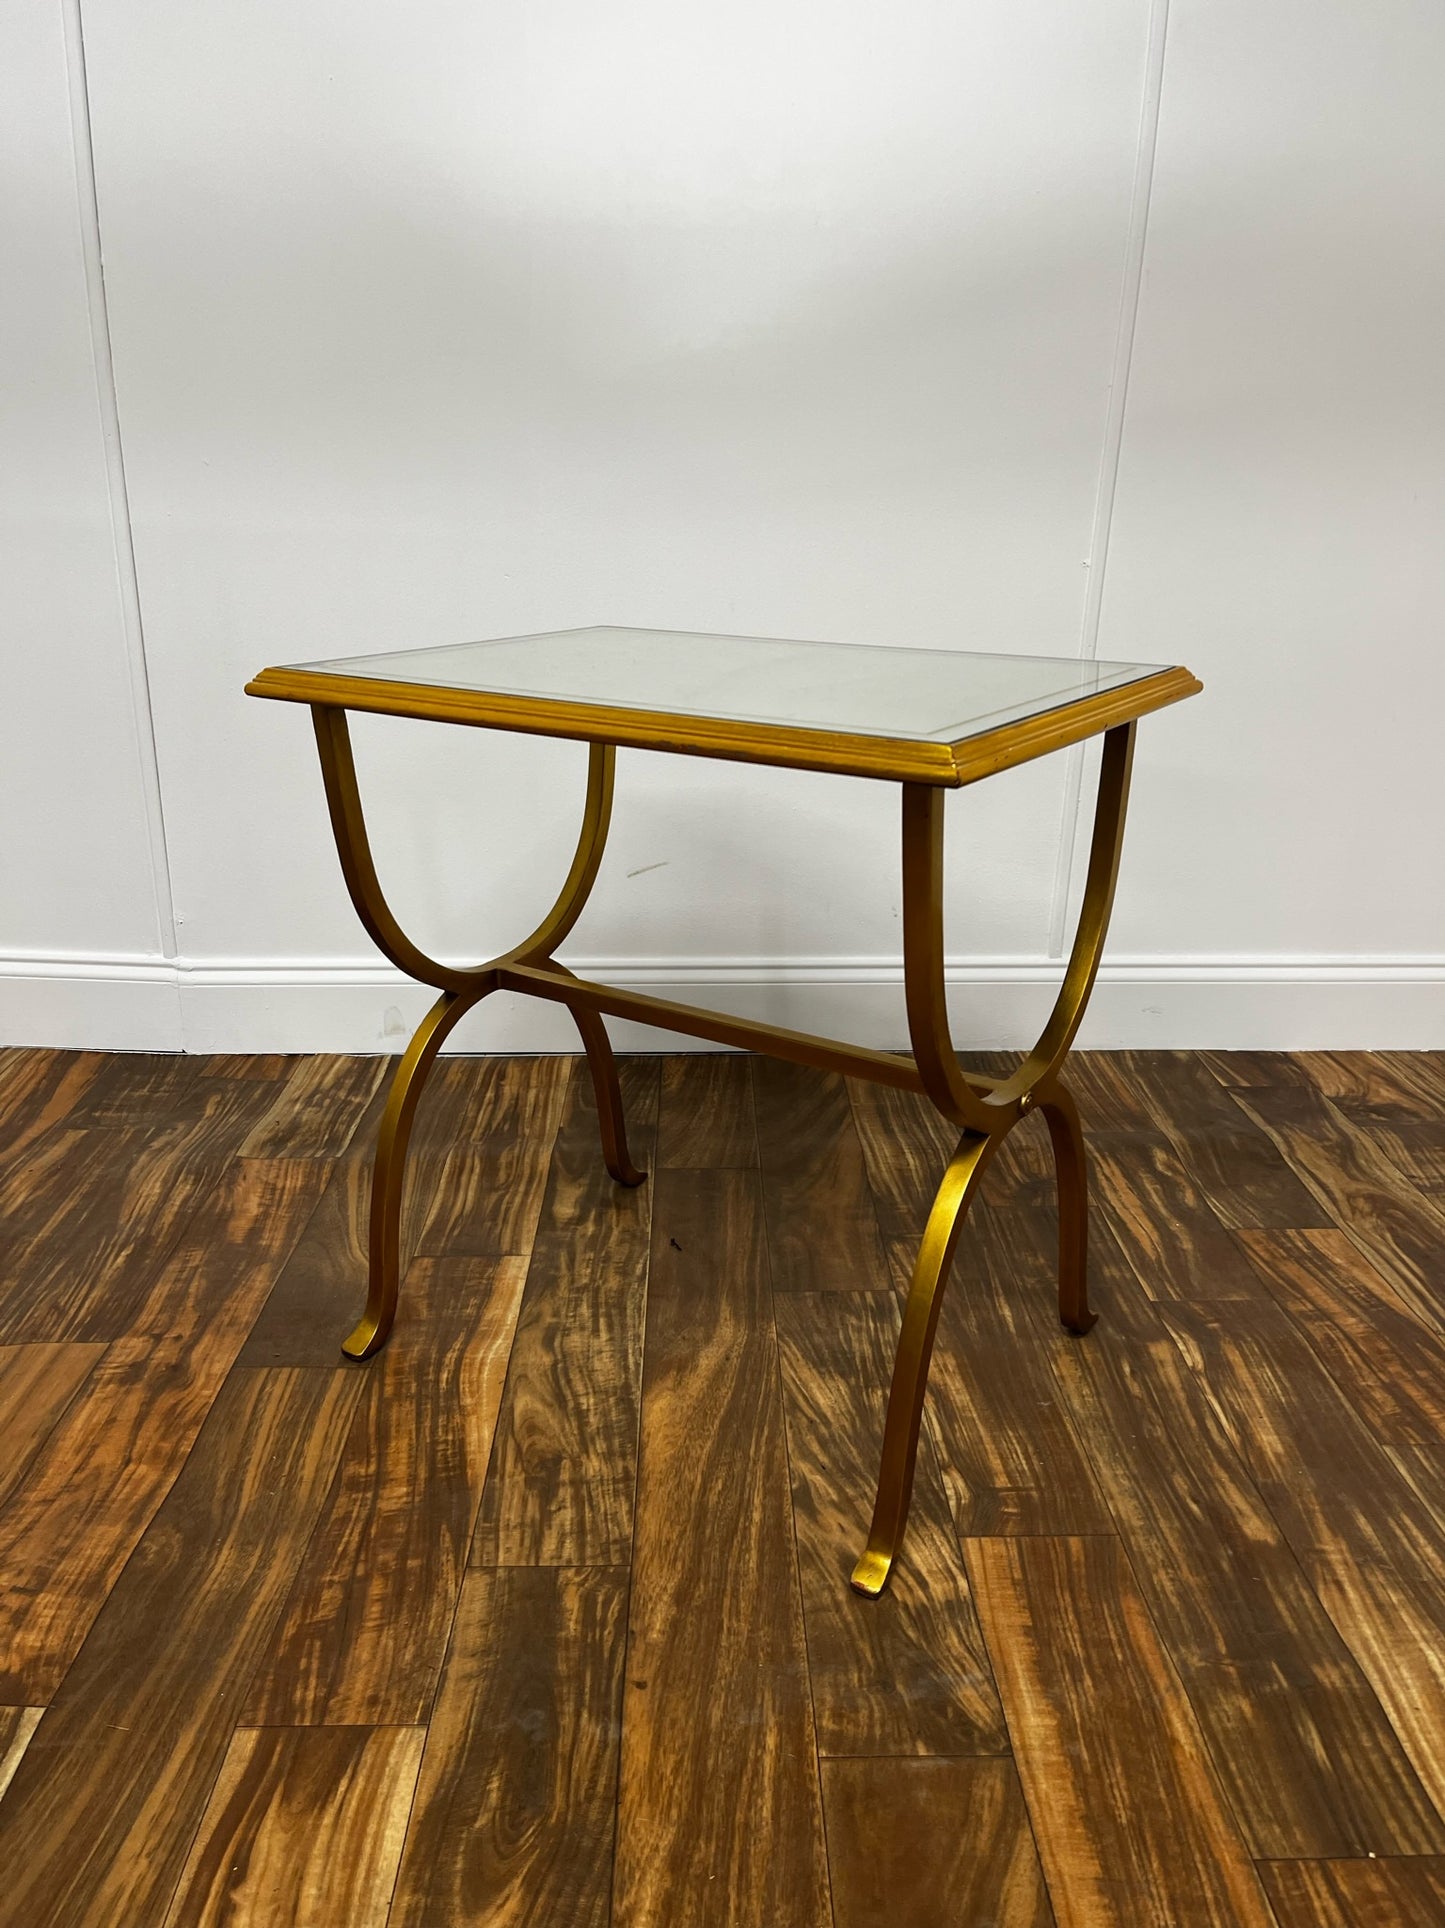 MIRRORRED GOLD RECTANGULAR SIDE TABLE